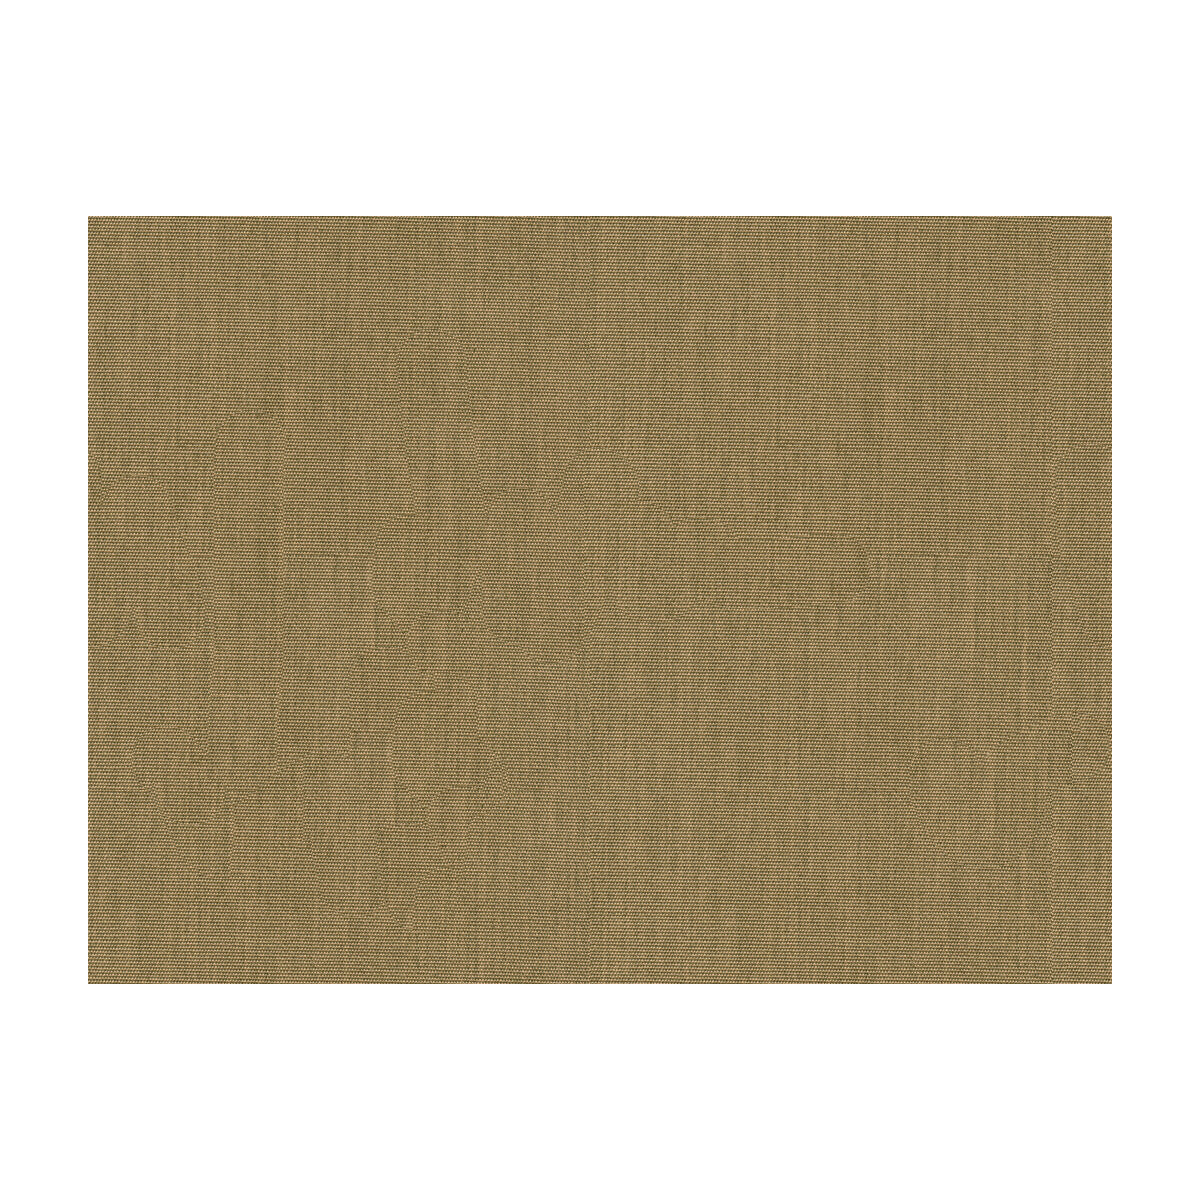 Canvas fabric in heather beige color - pattern GR-5476-0000.0.0 - by Kravet Design in the Soleil collection